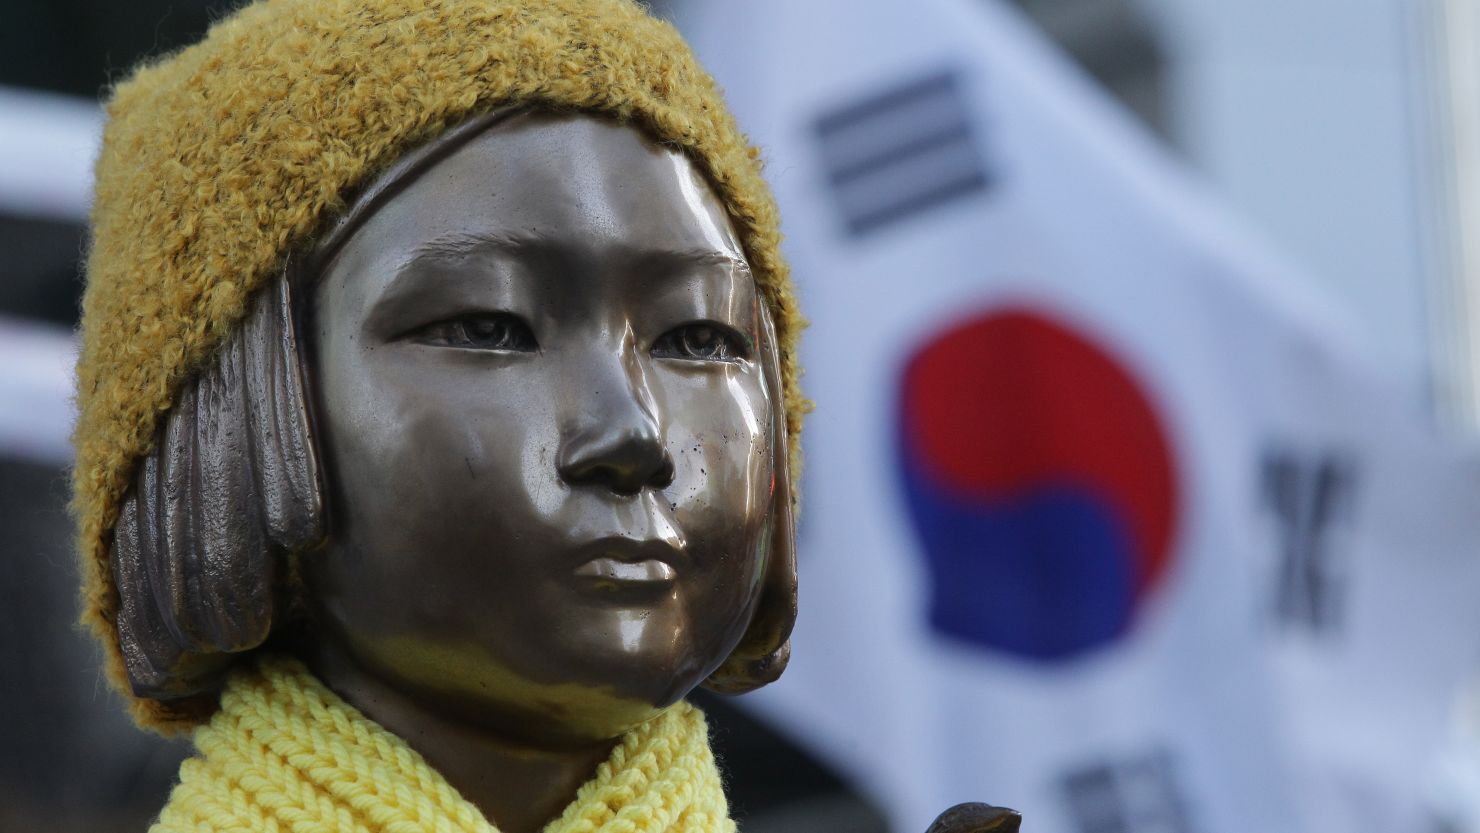 This statue has tested diplomatic relations between South Korea and Japan.